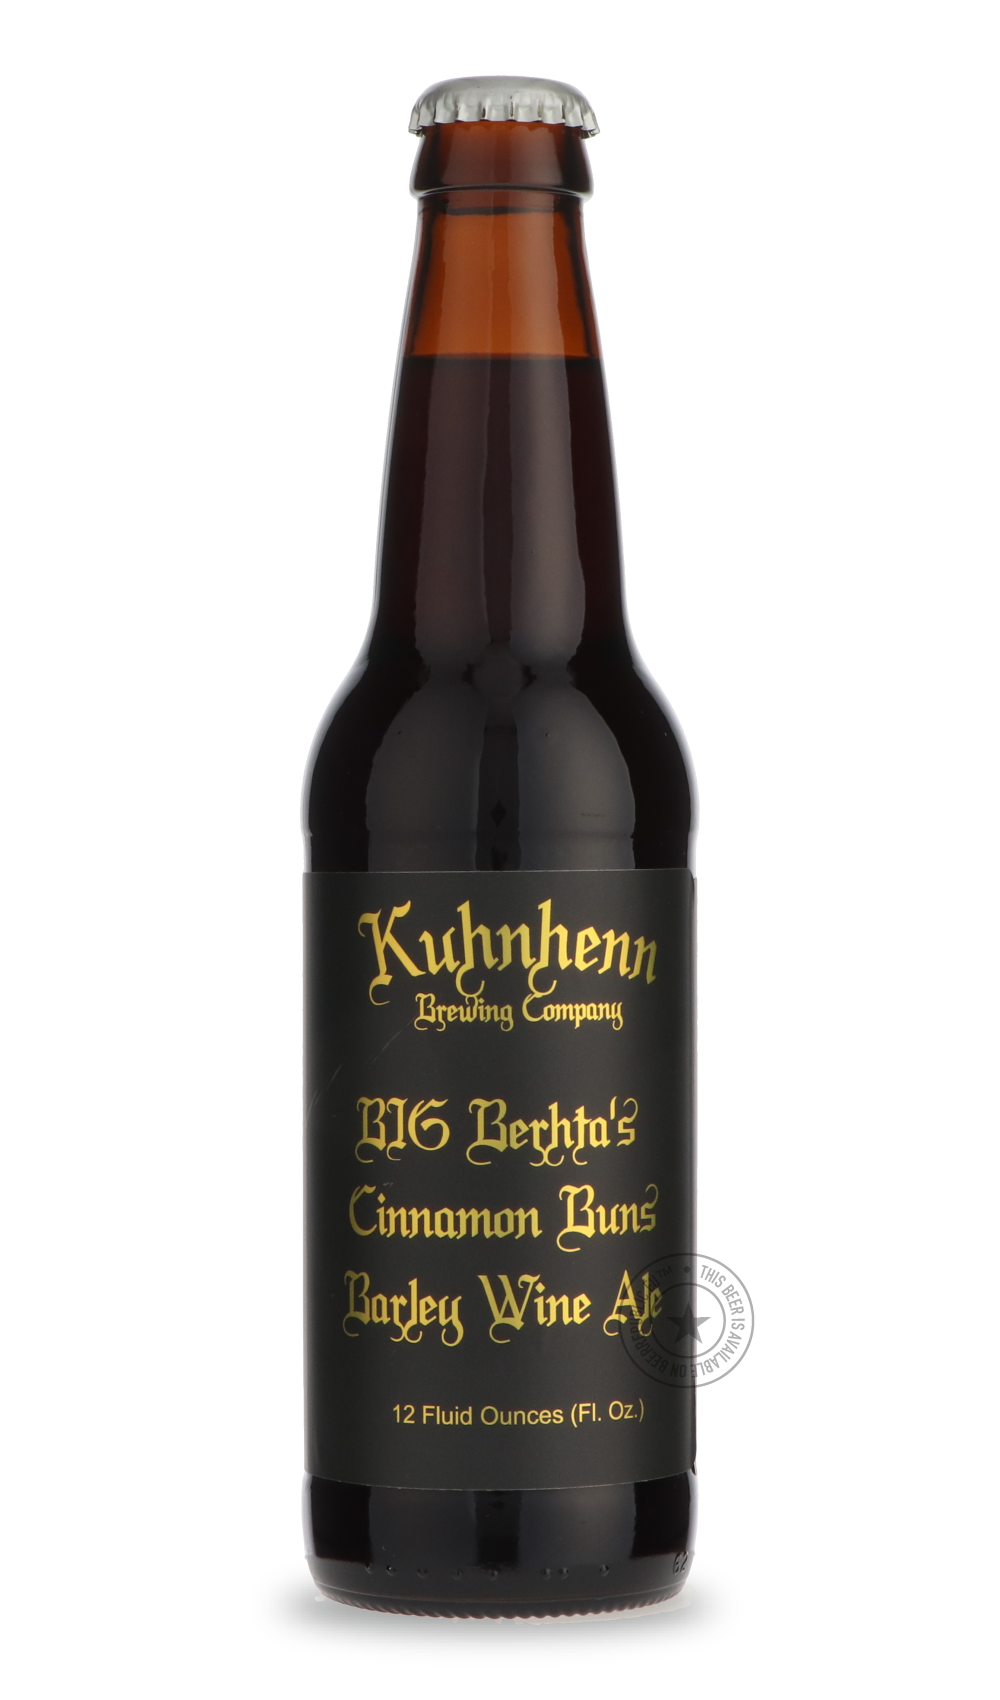 -Kuhnhenn- BIG Berhta’s Cinnamon Buns Barley Wine Ale-Brown & Dark- Only @ Beer Republic - The best online beer store for American & Canadian craft beer - Buy beer online from the USA and Canada - Bier online kopen - Amerikaans bier kopen - Craft beer store - Craft beer kopen - Amerikanisch bier kaufen - Bier online kaufen - Acheter biere online - IPA - Stout - Porter - New England IPA - Hazy IPA - Imperial Stout - Barrel Aged - Barrel Aged Imperial Stout - Brown - Dark beer - Blond - Blonde - Pilsner - Lag